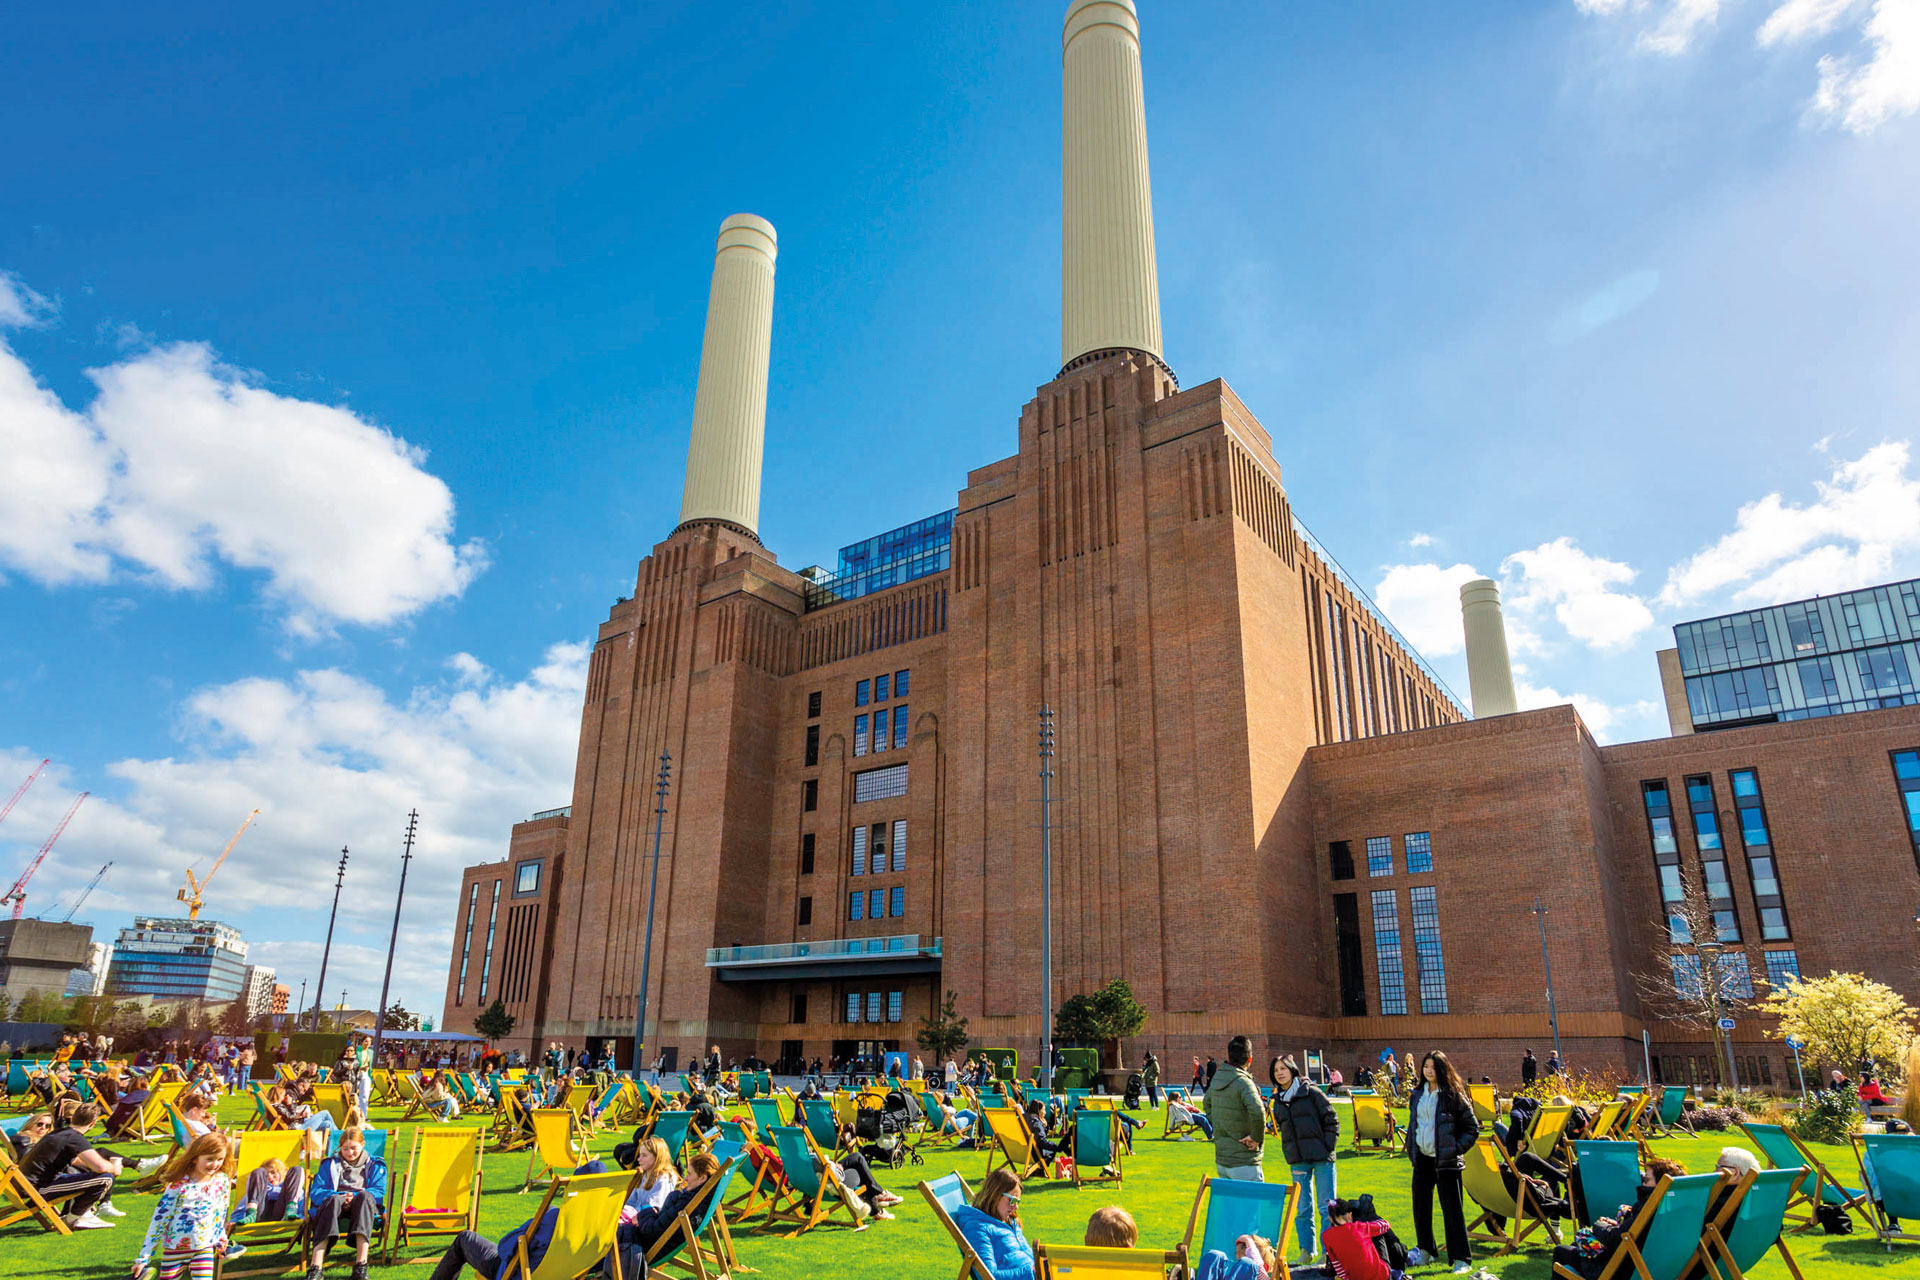 Battersea Power Station: From Derelict Power Station to Thriving Riverside Neighbourhood